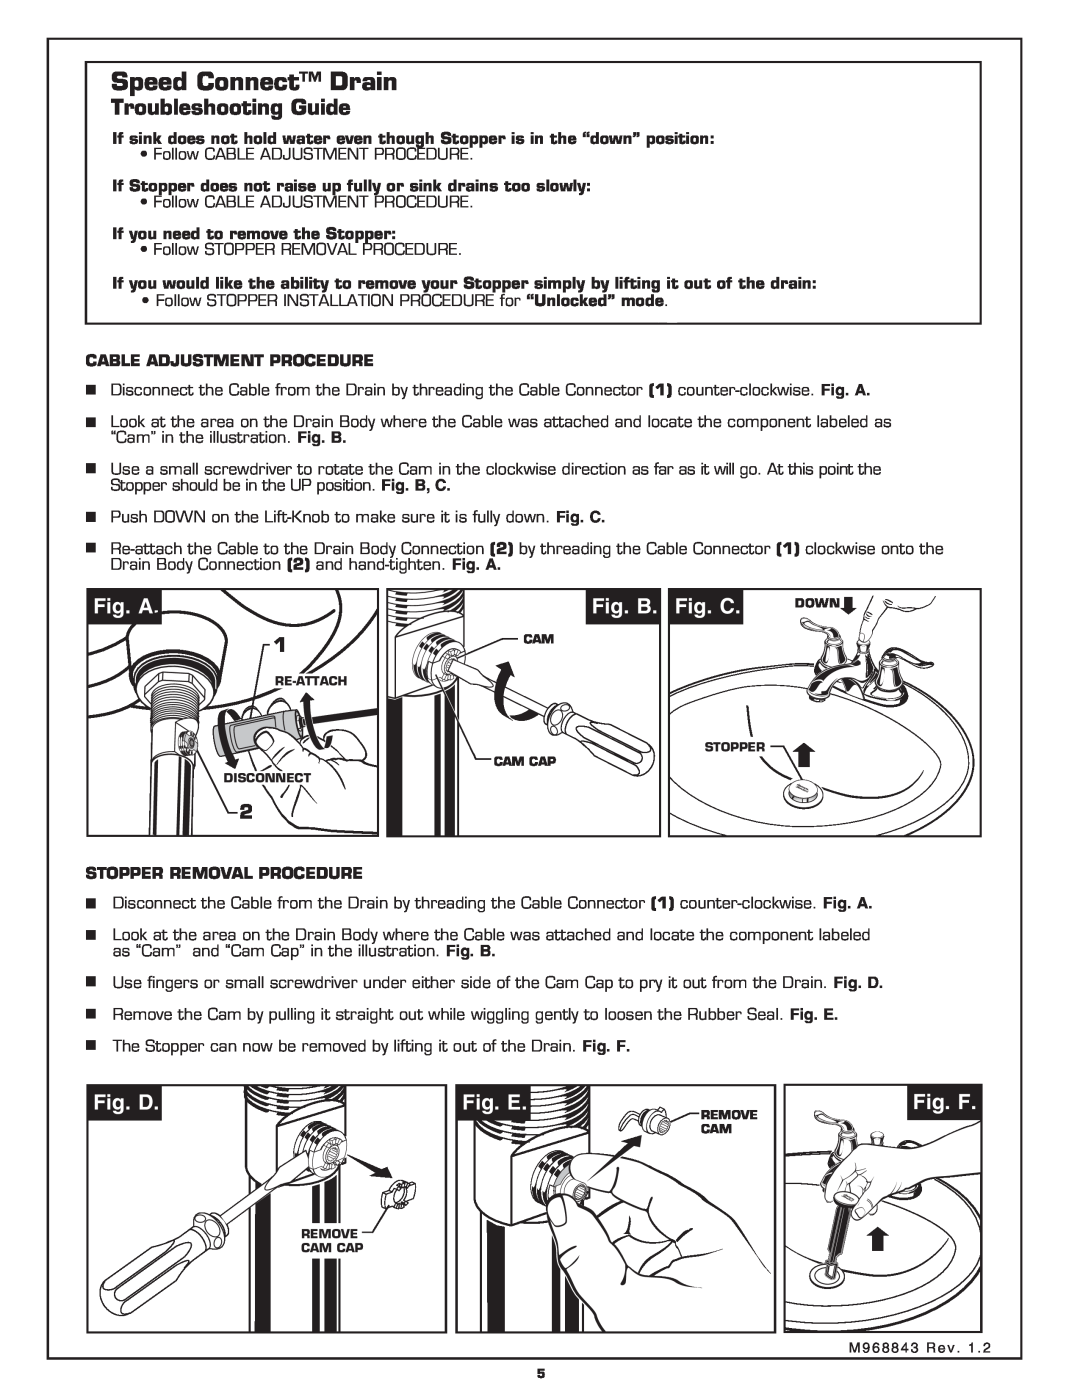 American Standard 4508.201 Troubleshooting Guide, Fig. A, Fig. B, Fig. C, Fig. D, Fig. E, Fig. F, Speed Connect Drain 